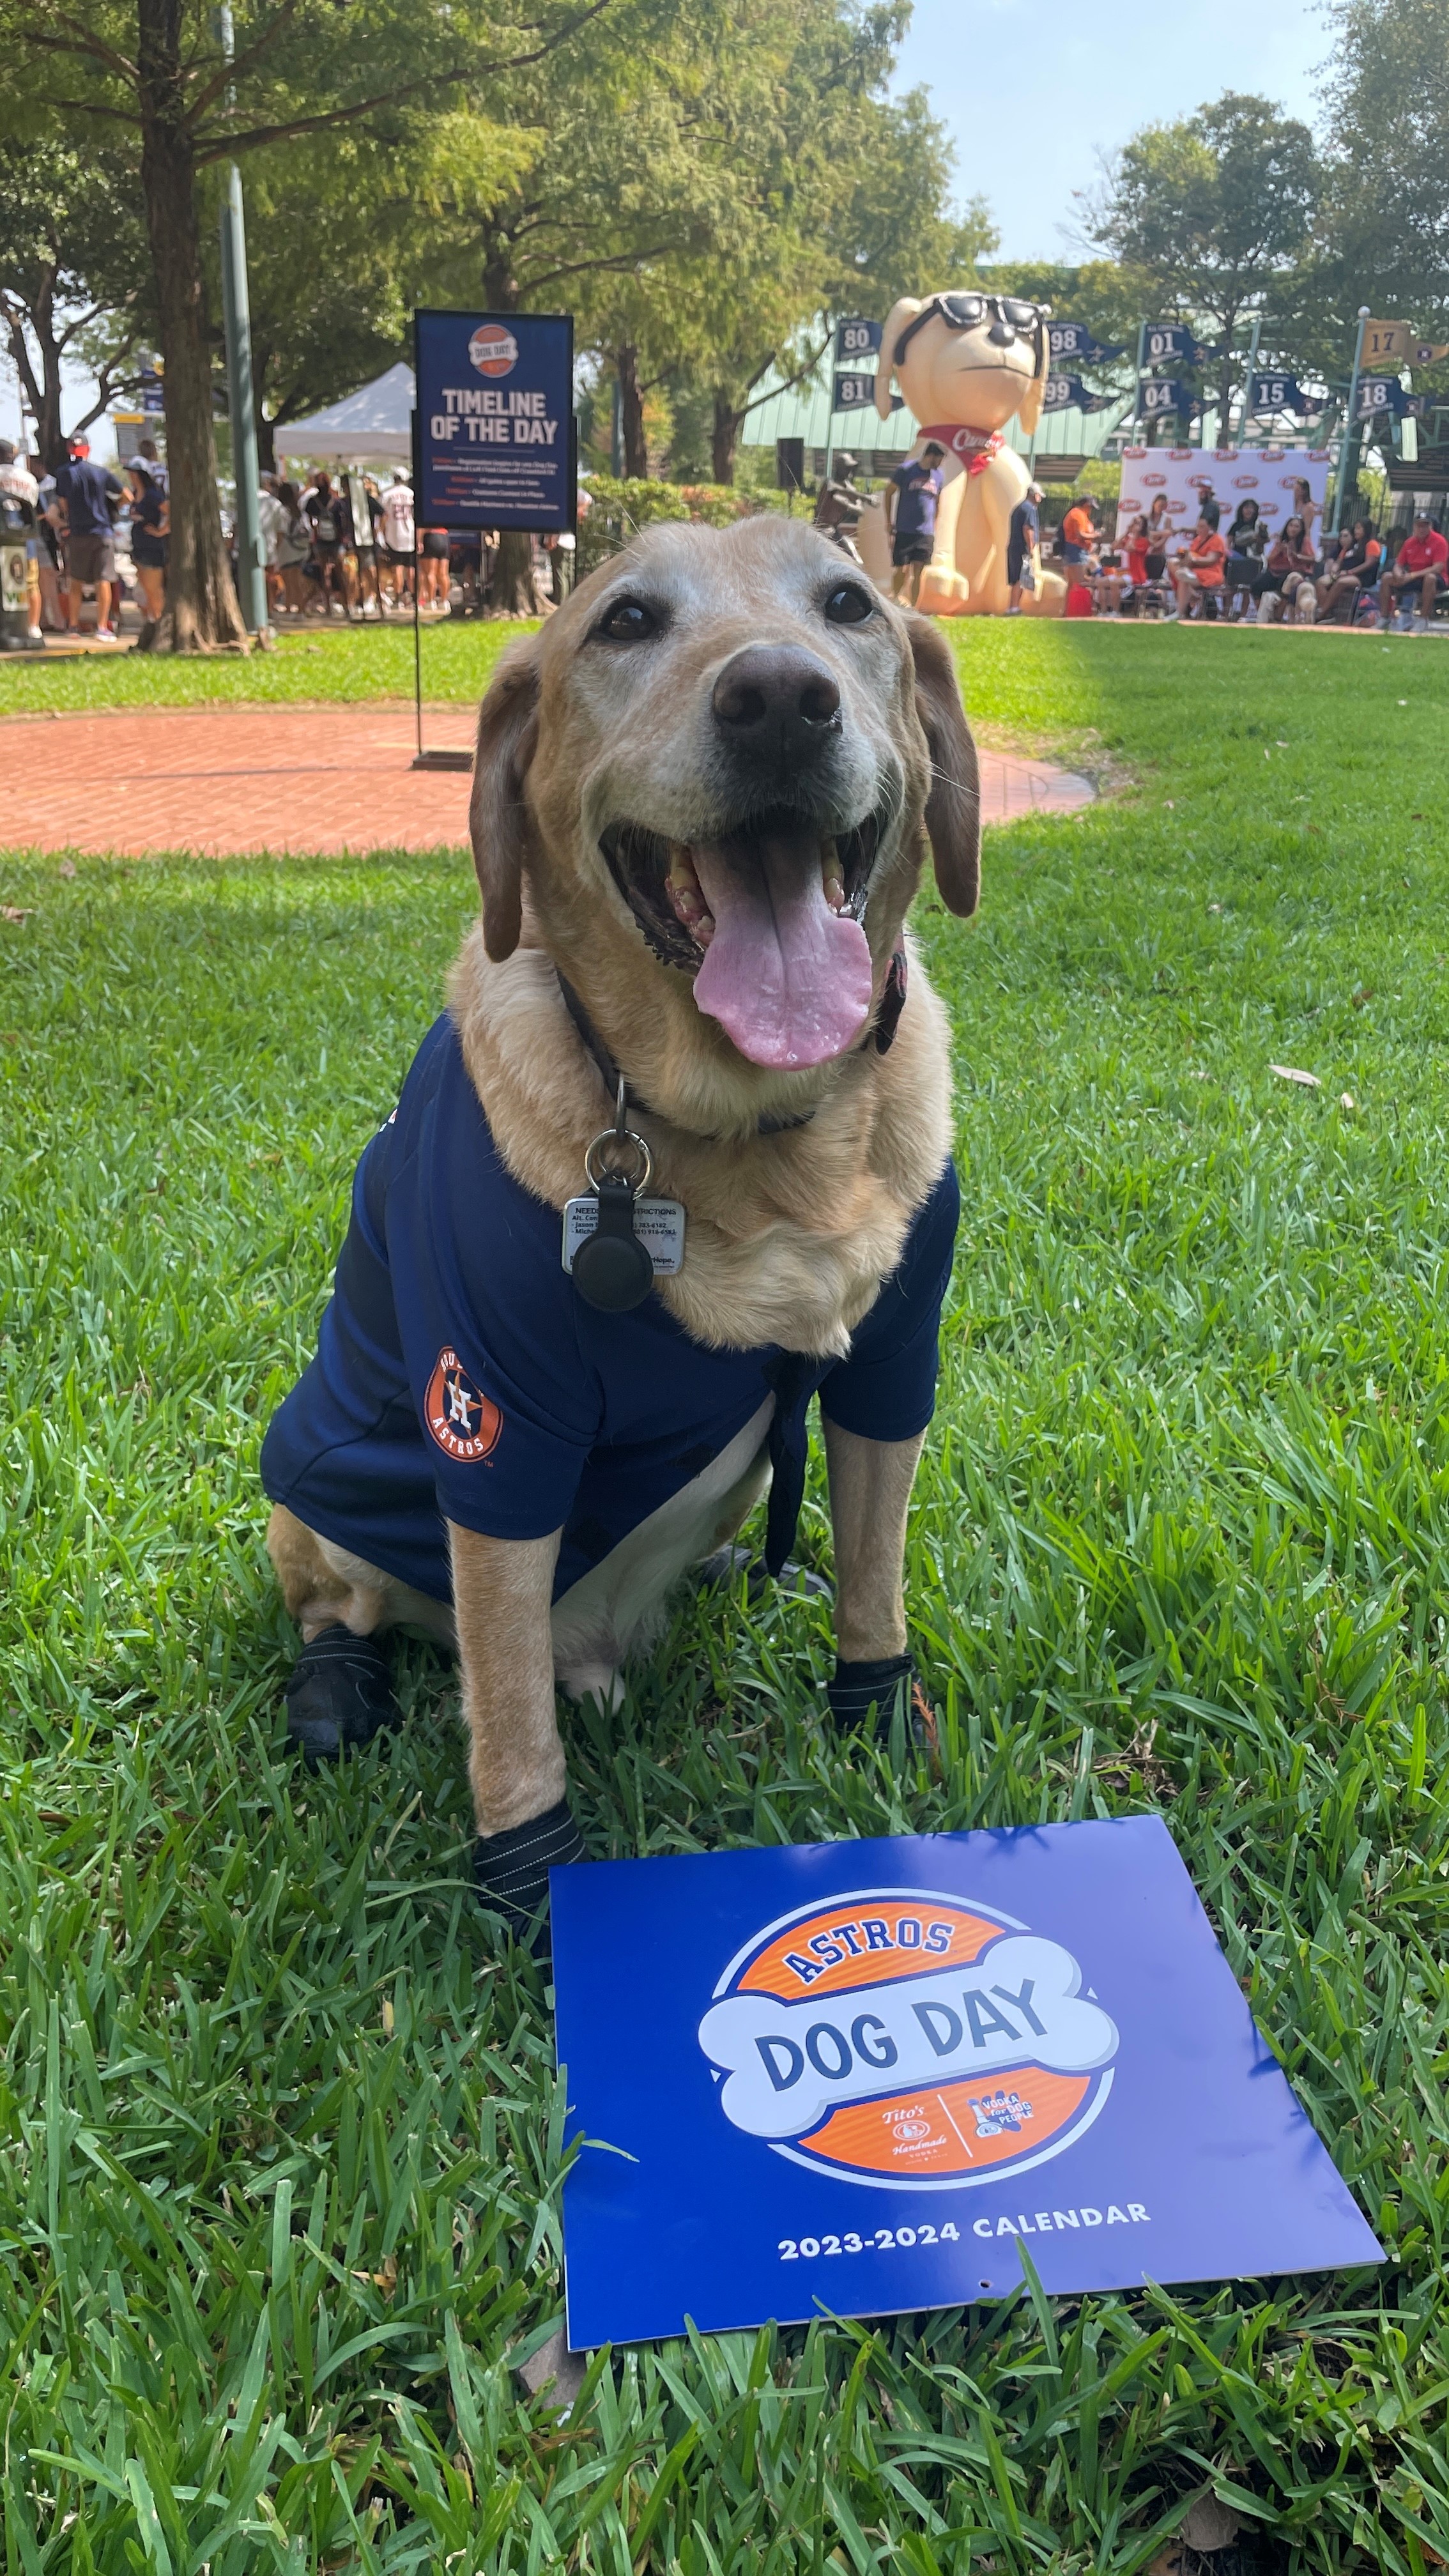 astros jersey for dogs